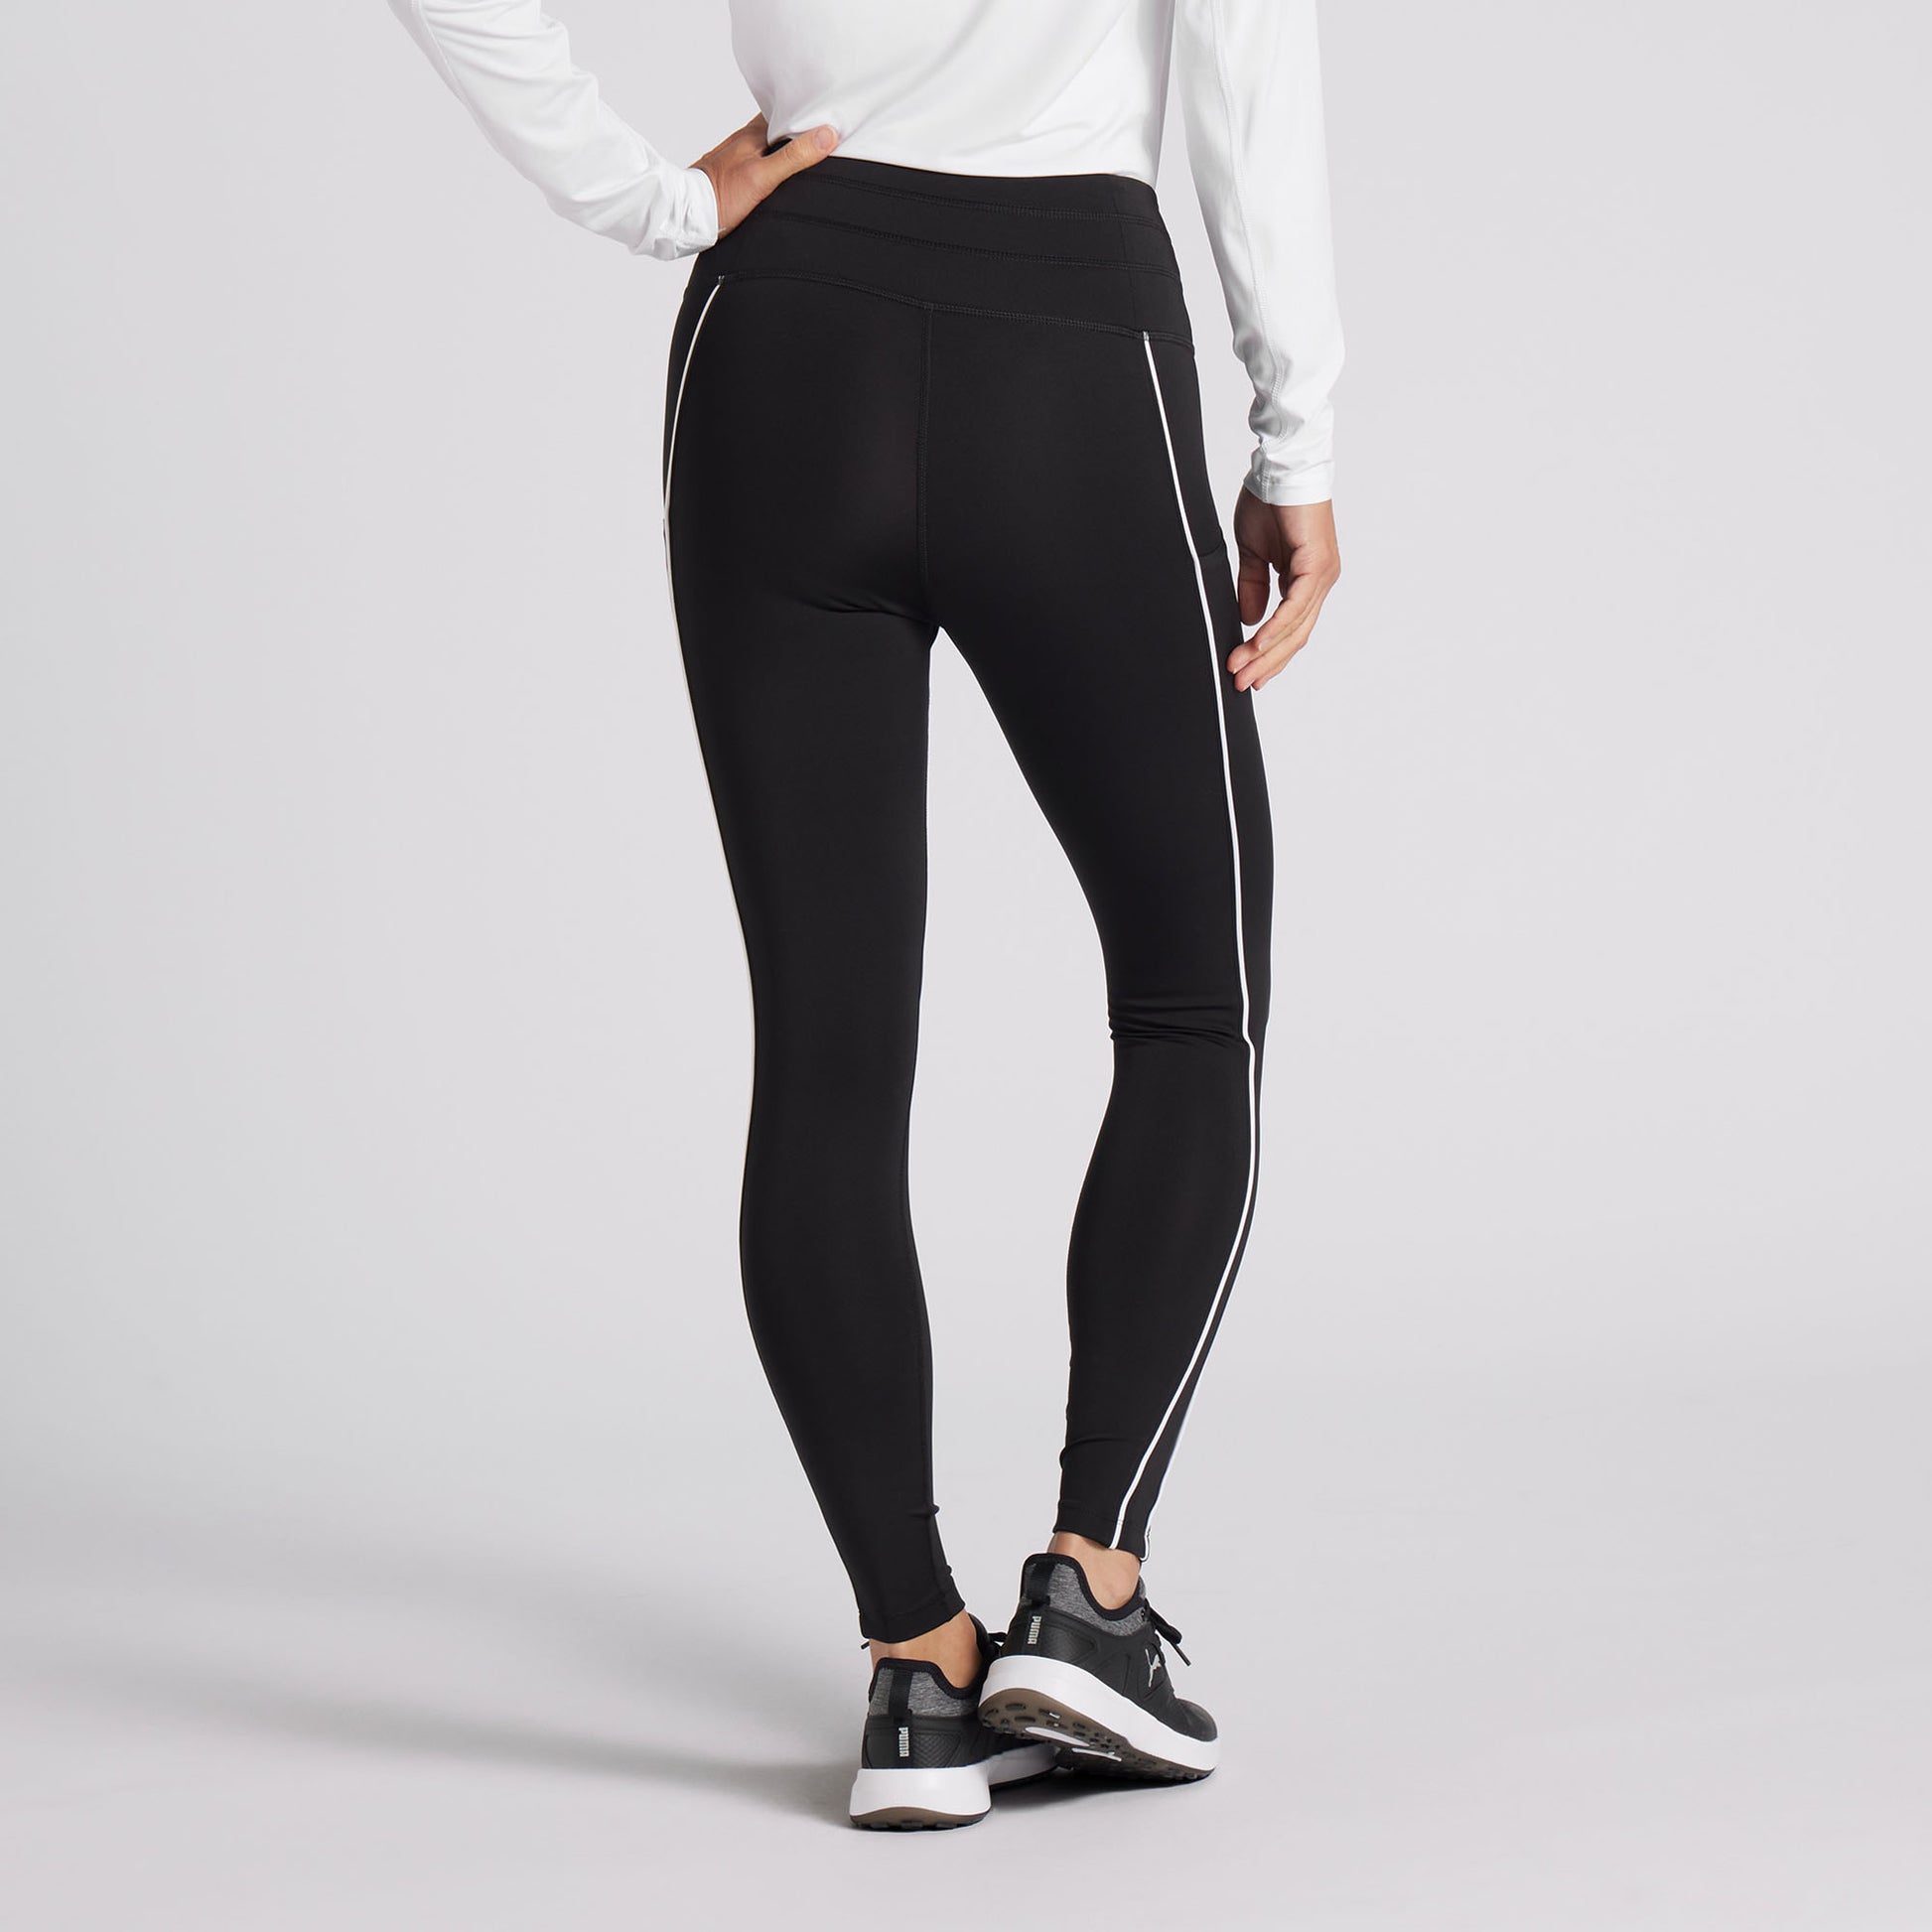 Puma Ladies You-V Leggings in Black with White Piping Detail – GolfGarb